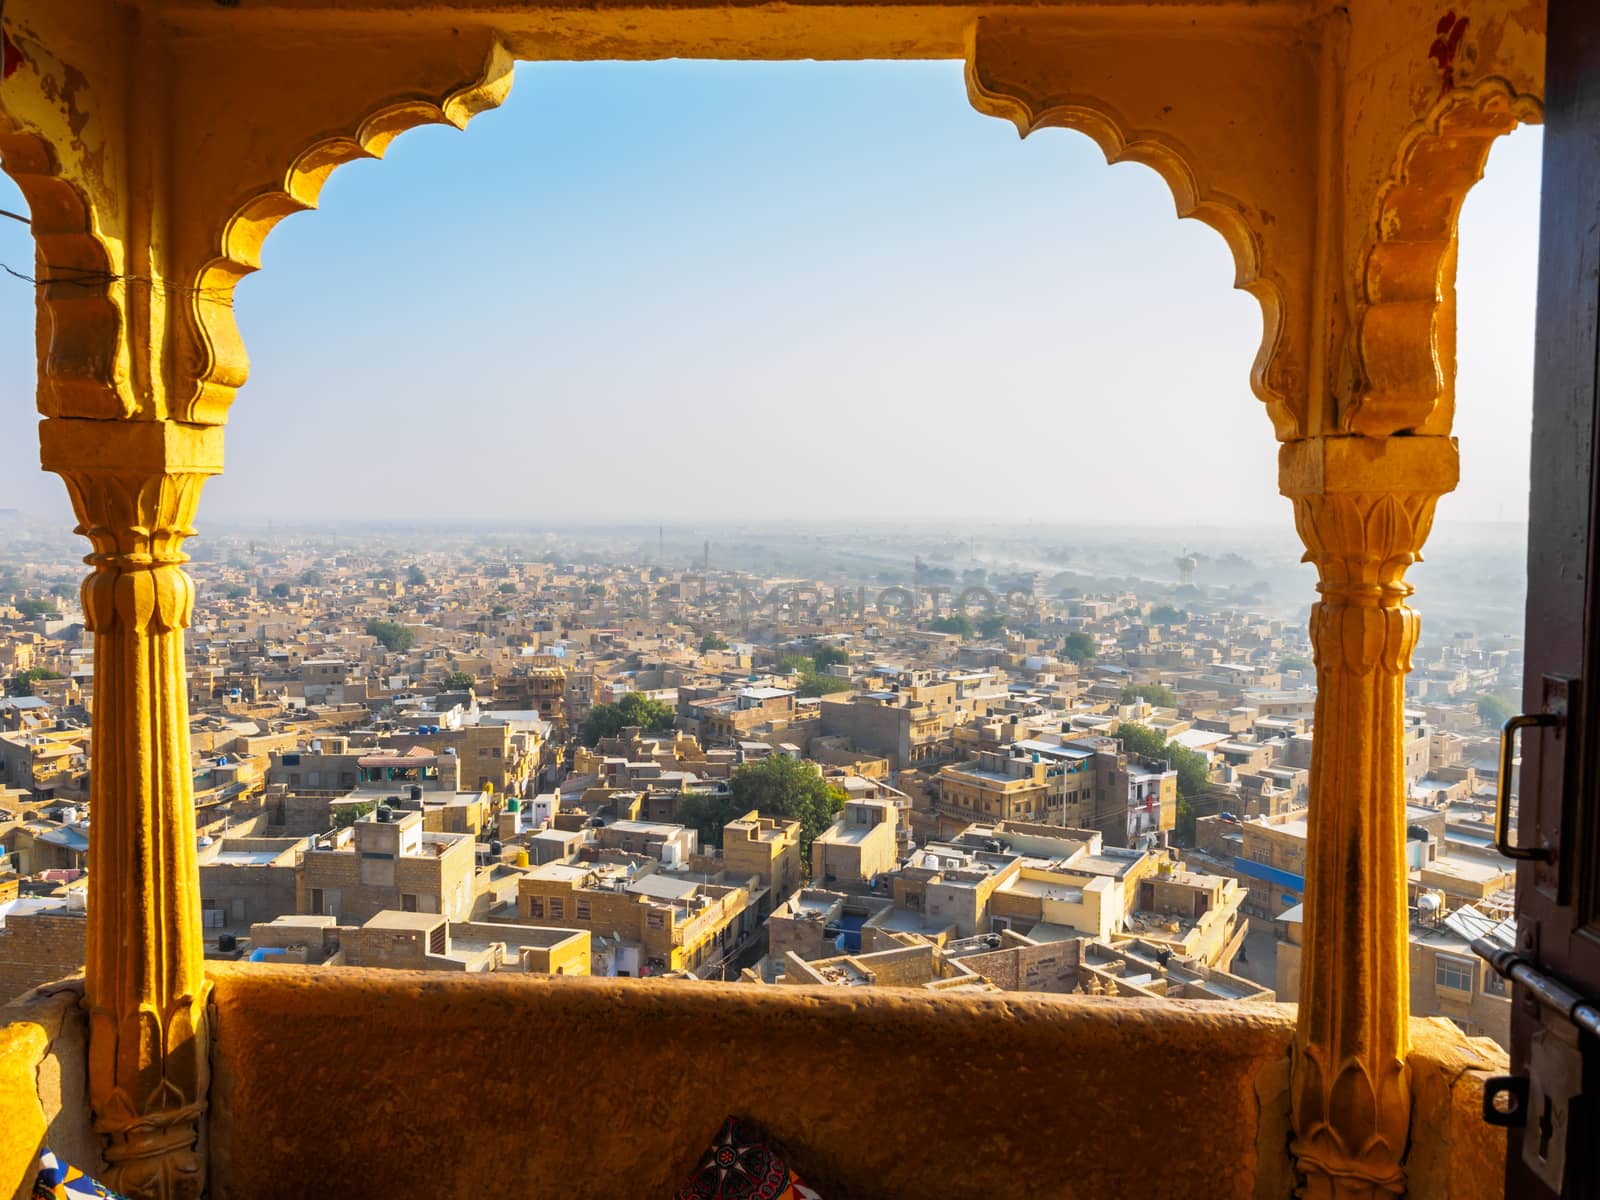 Townscape view from Jaisalmer Fort by takepicsforfun